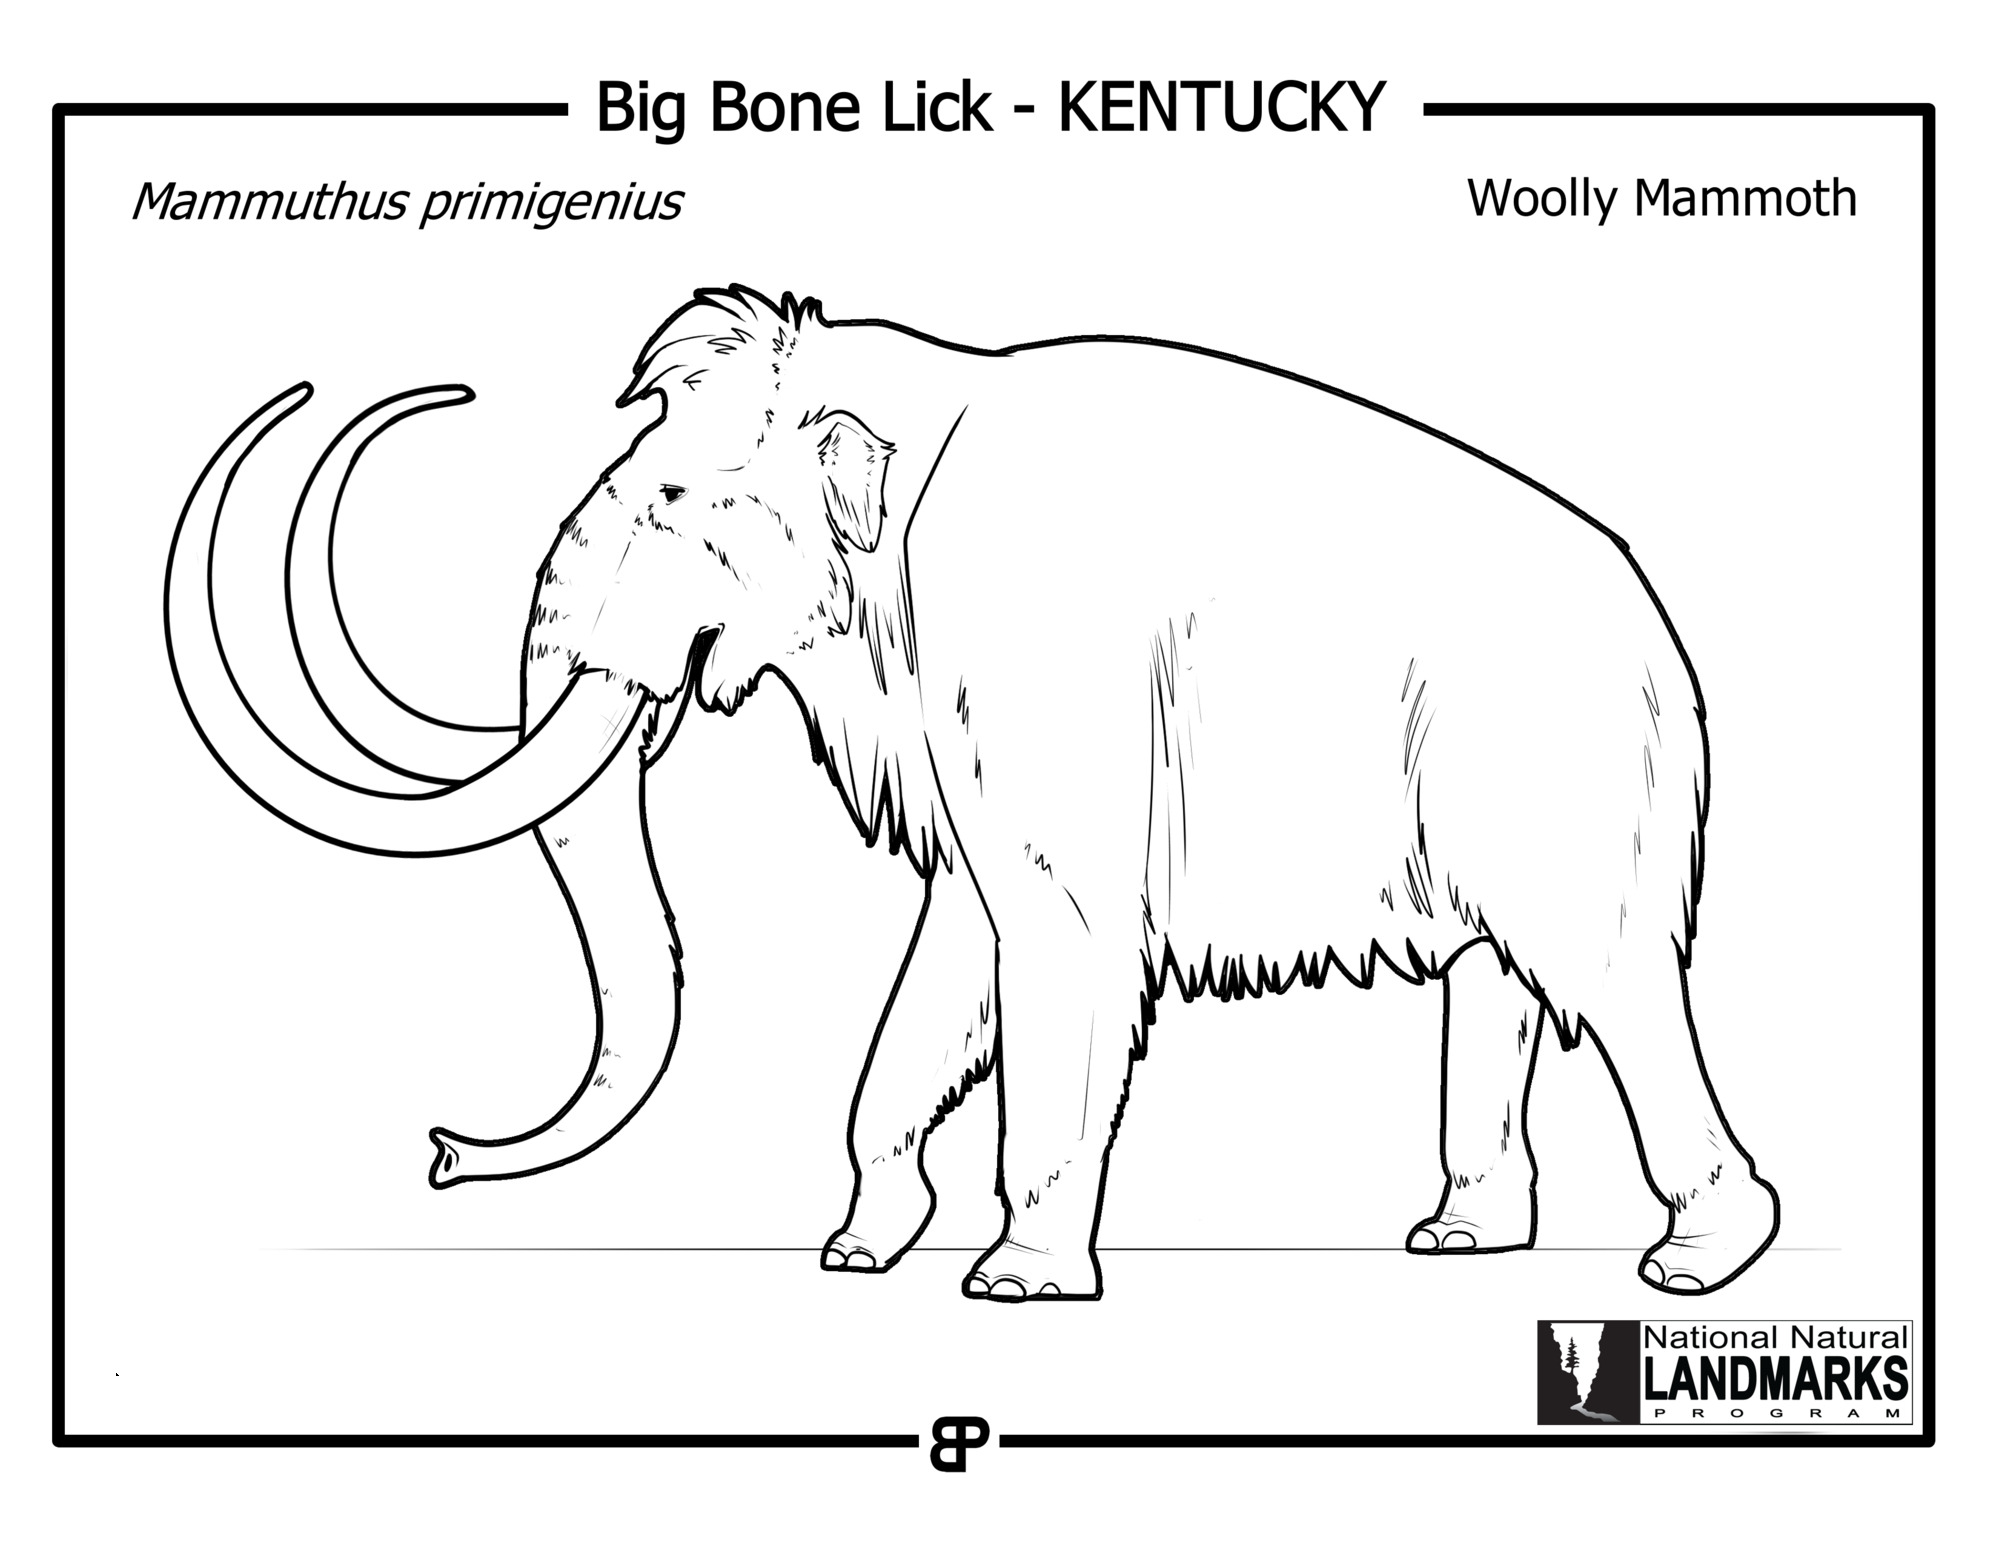 Black and white line drawing of a woolly mammoth